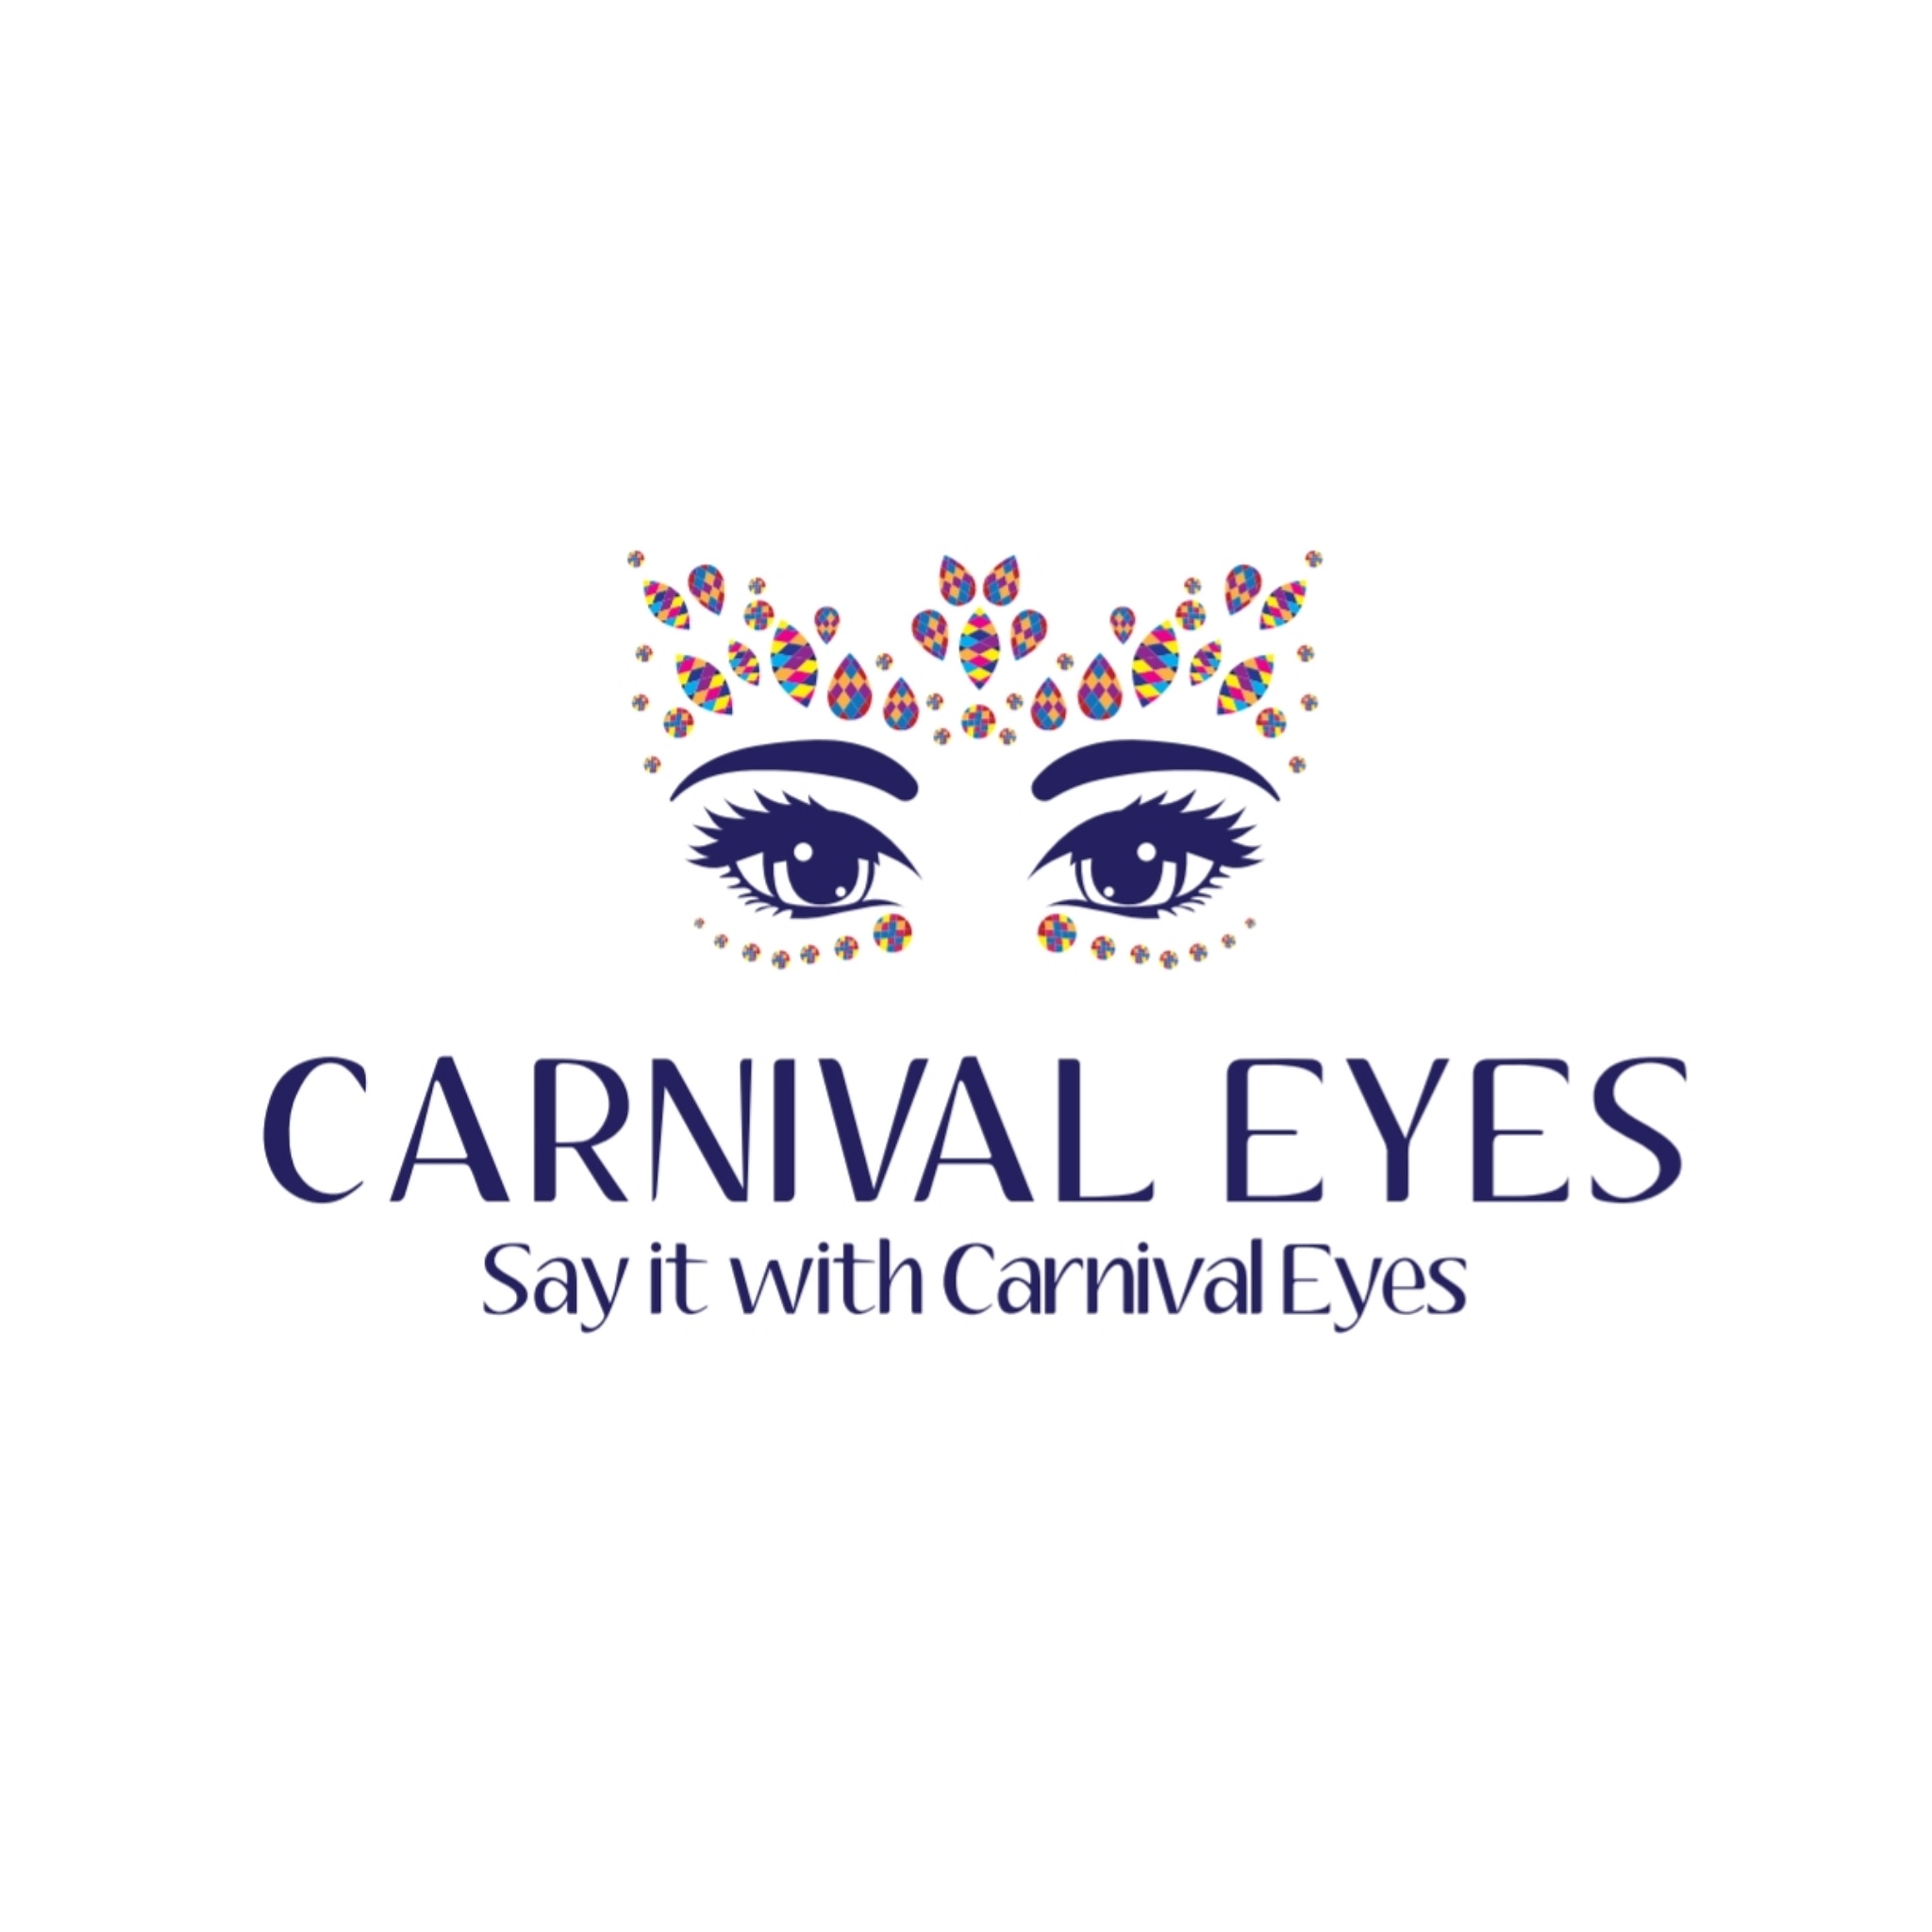 The logo or business face of "Carnival Eyes"